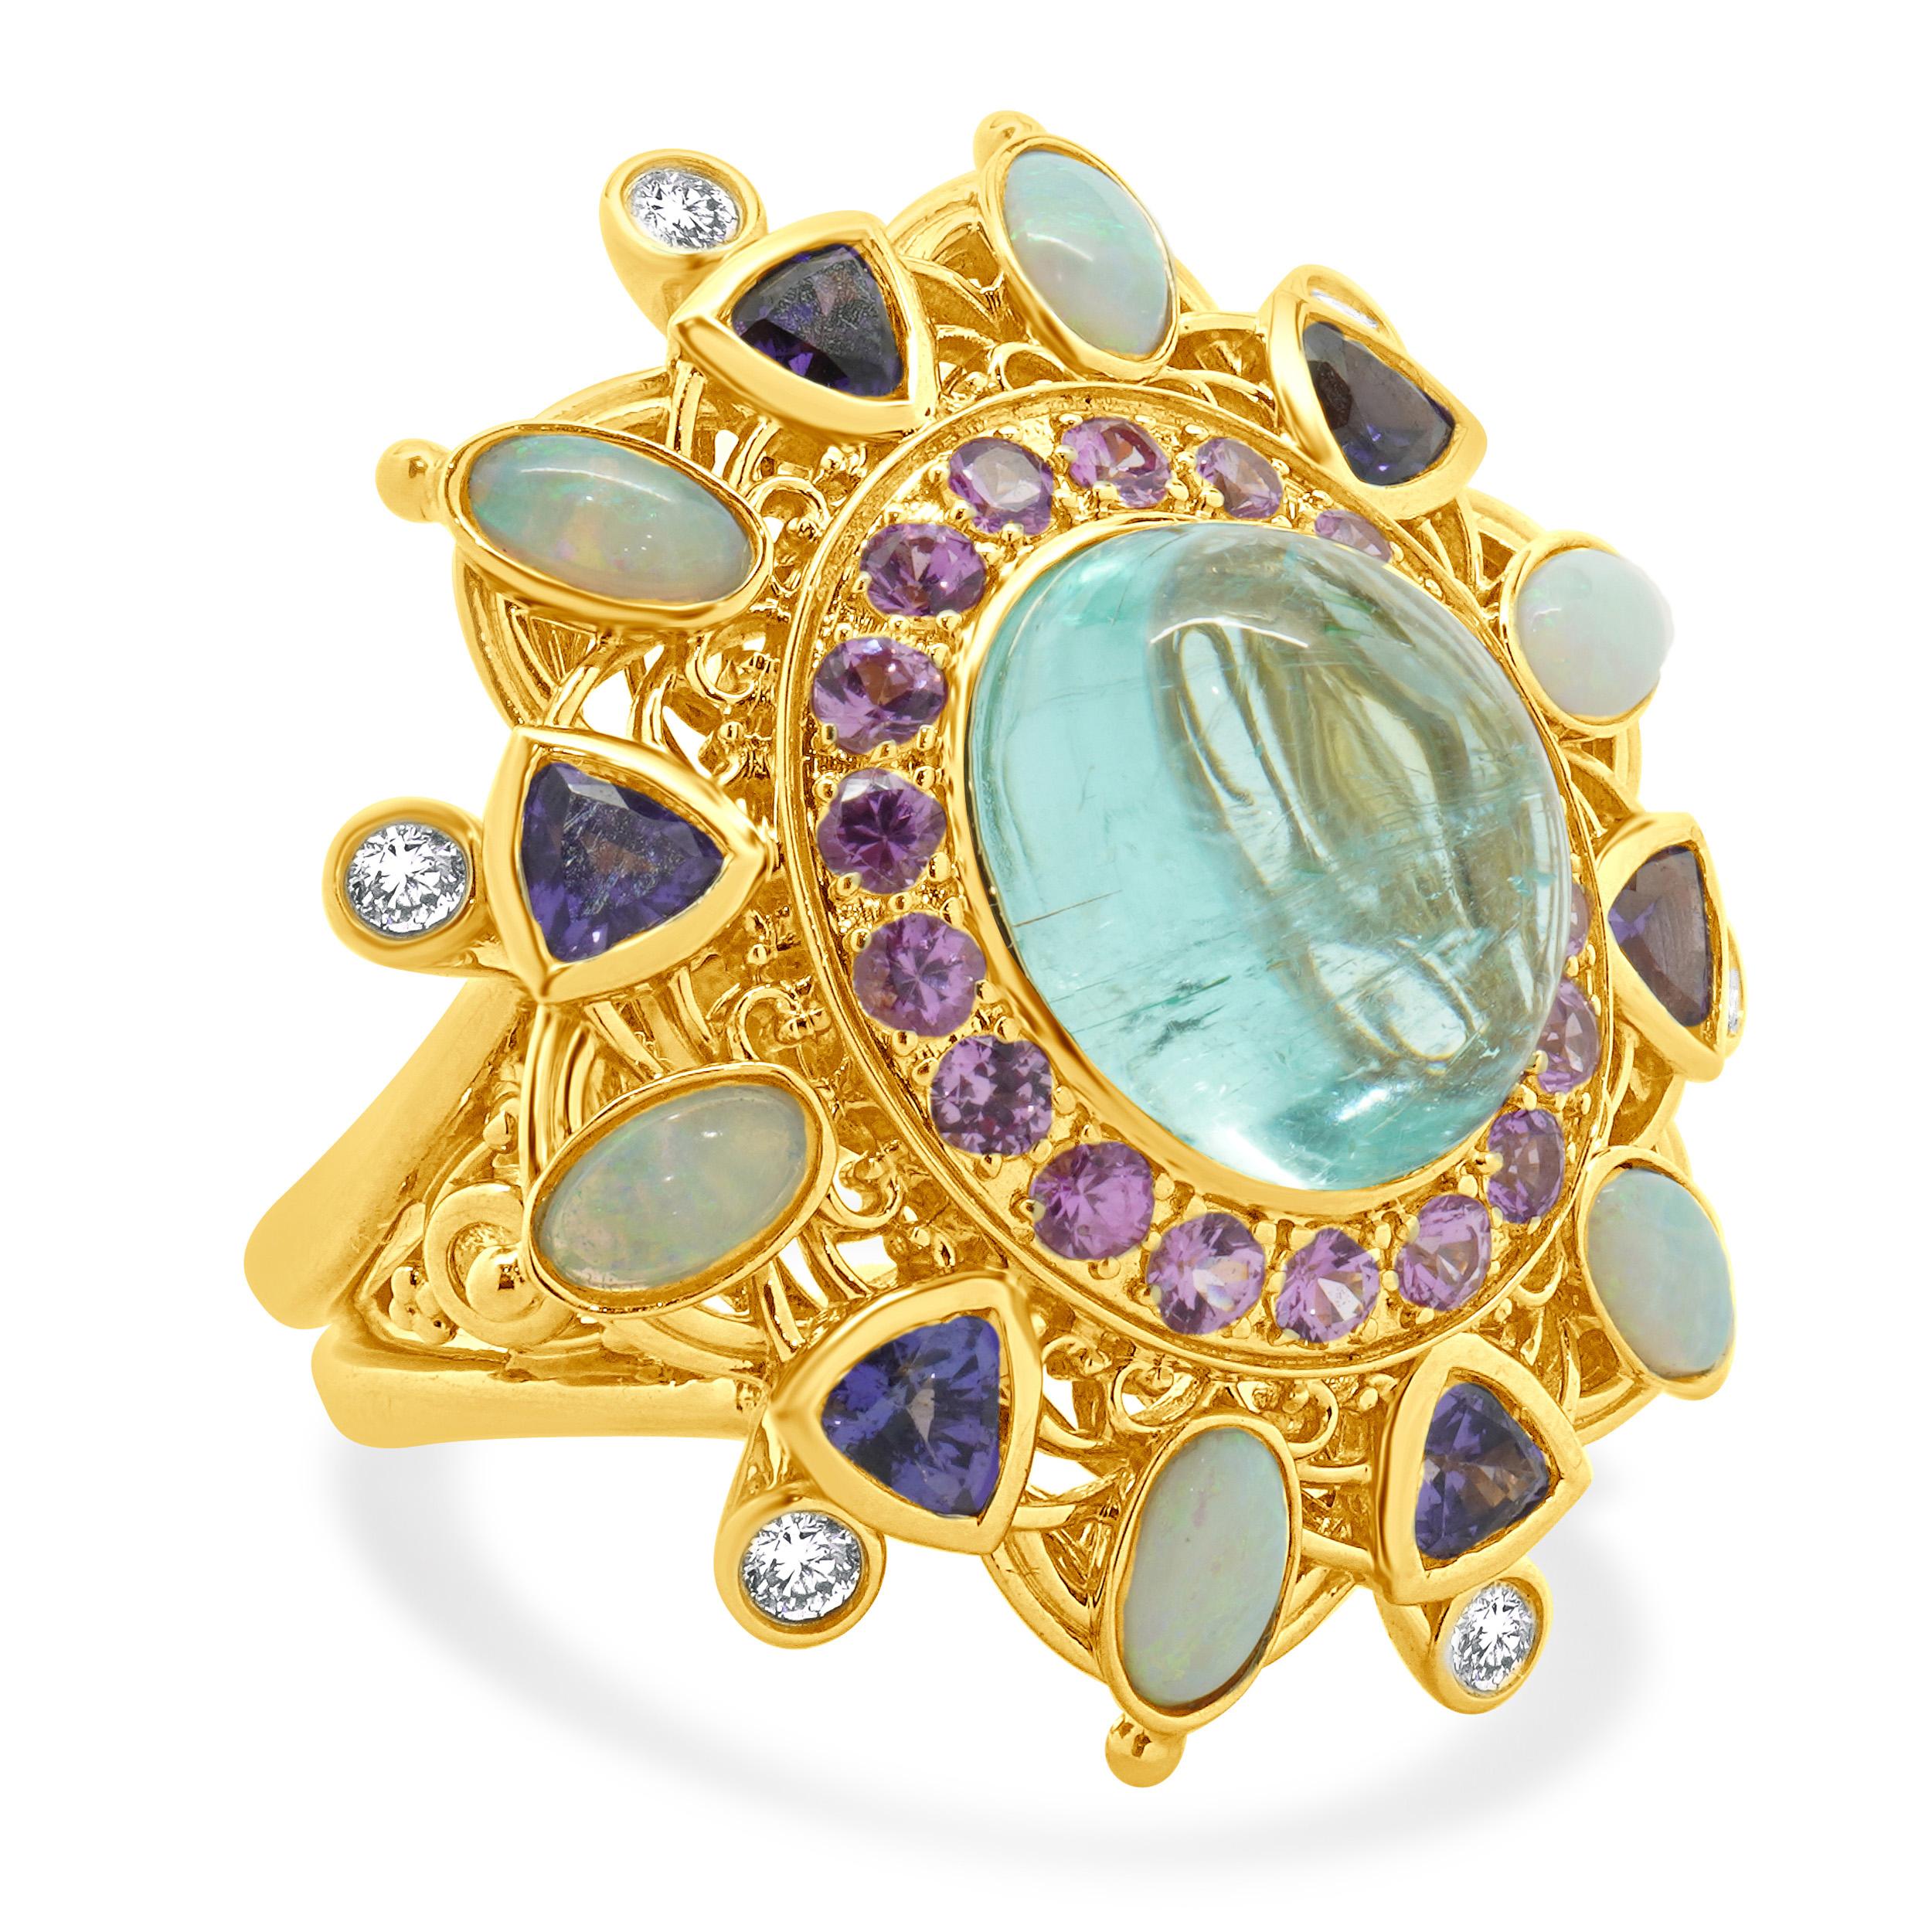 18k Yellow Gold Paraiba Tourmaline, Opal, Iolite, Tourmaline, and Diamond Ring In Excellent Condition For Sale In Scottsdale, AZ